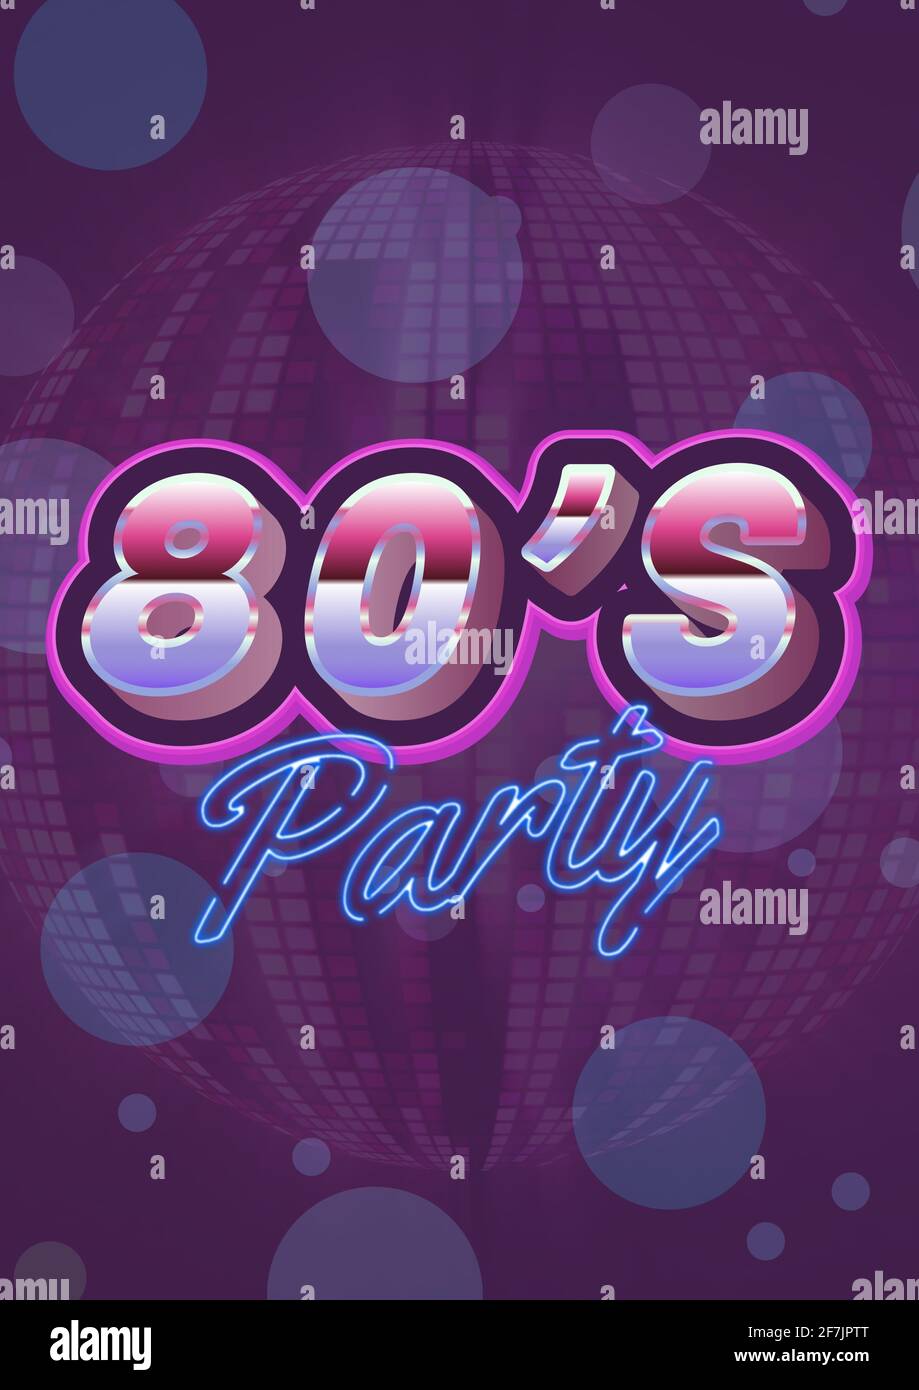 80's party written in shiny numbers and blue letters on invite with purple background Stock Photo